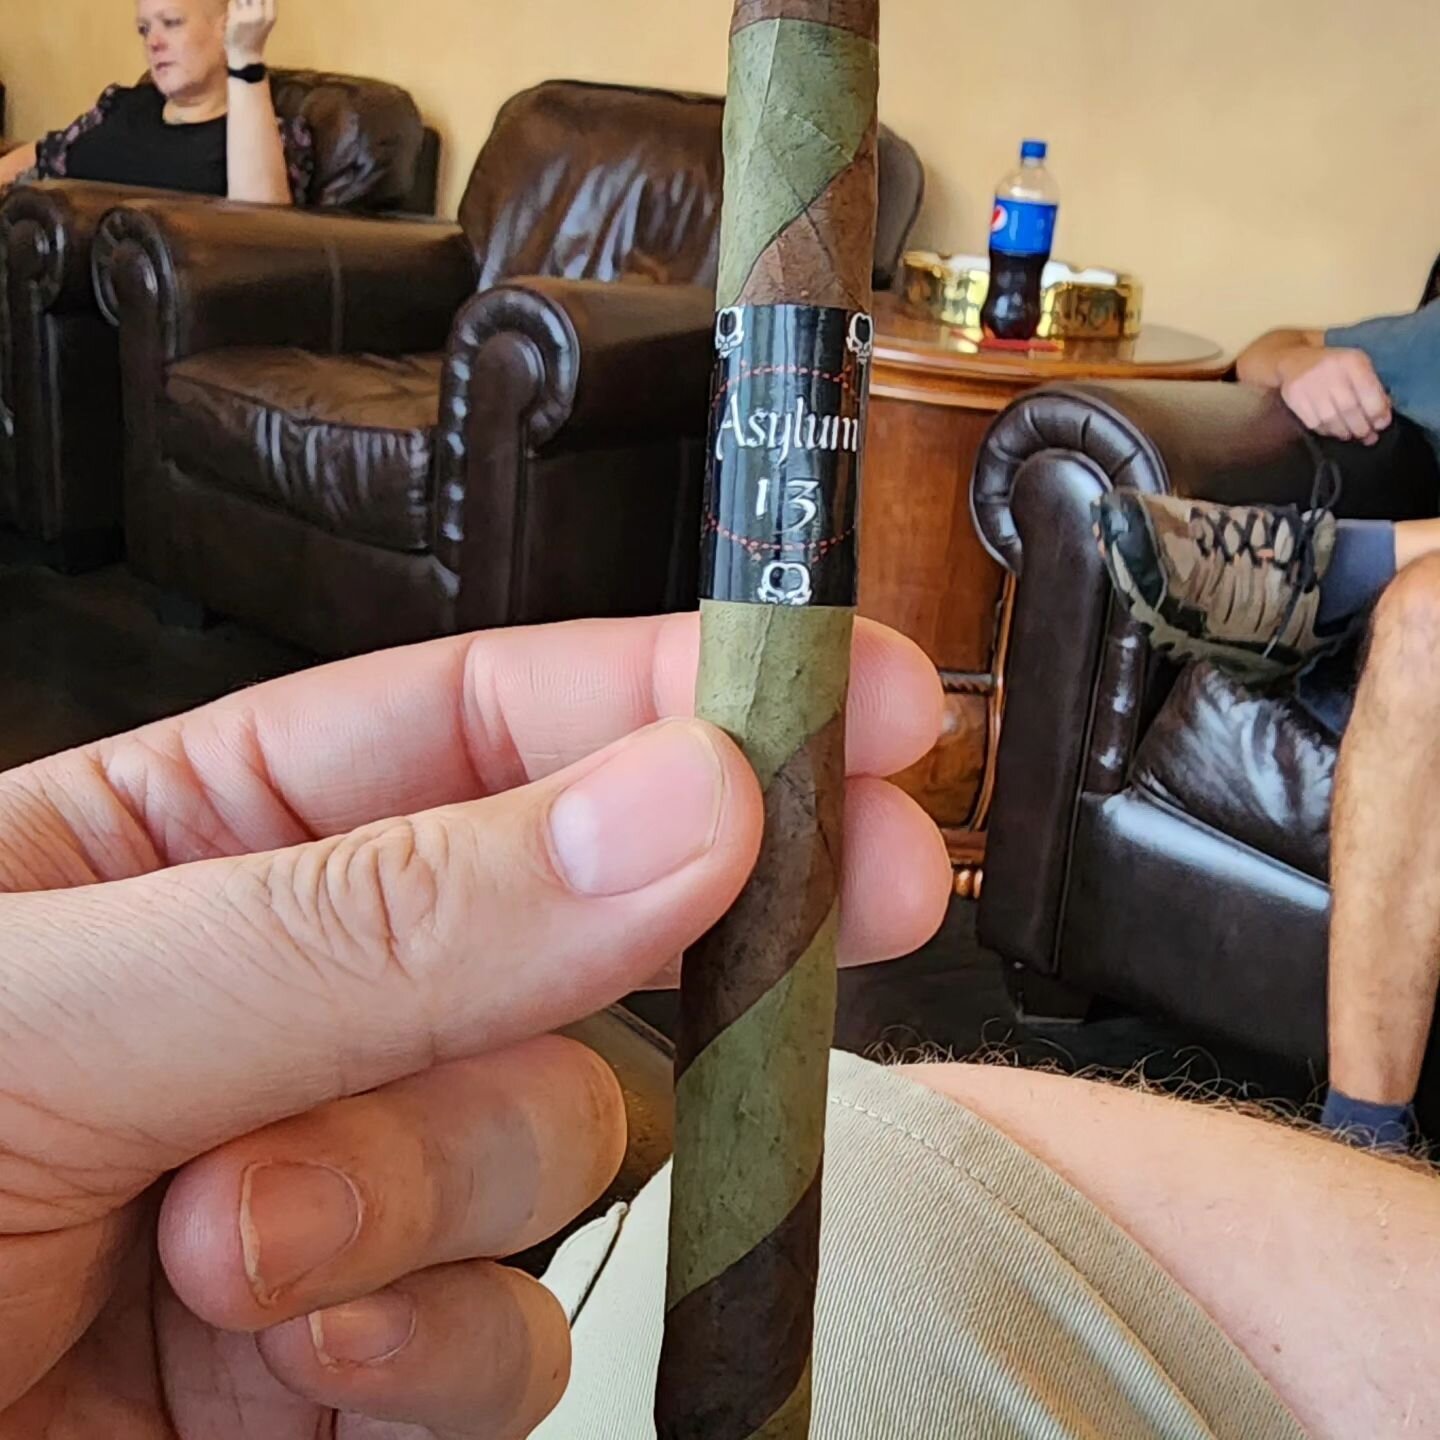 When in Rome smoke something new.  Hanging out in my favorite spot in Longmont, CO. Smoking an Asylum  13 Barber Pole Lancero.